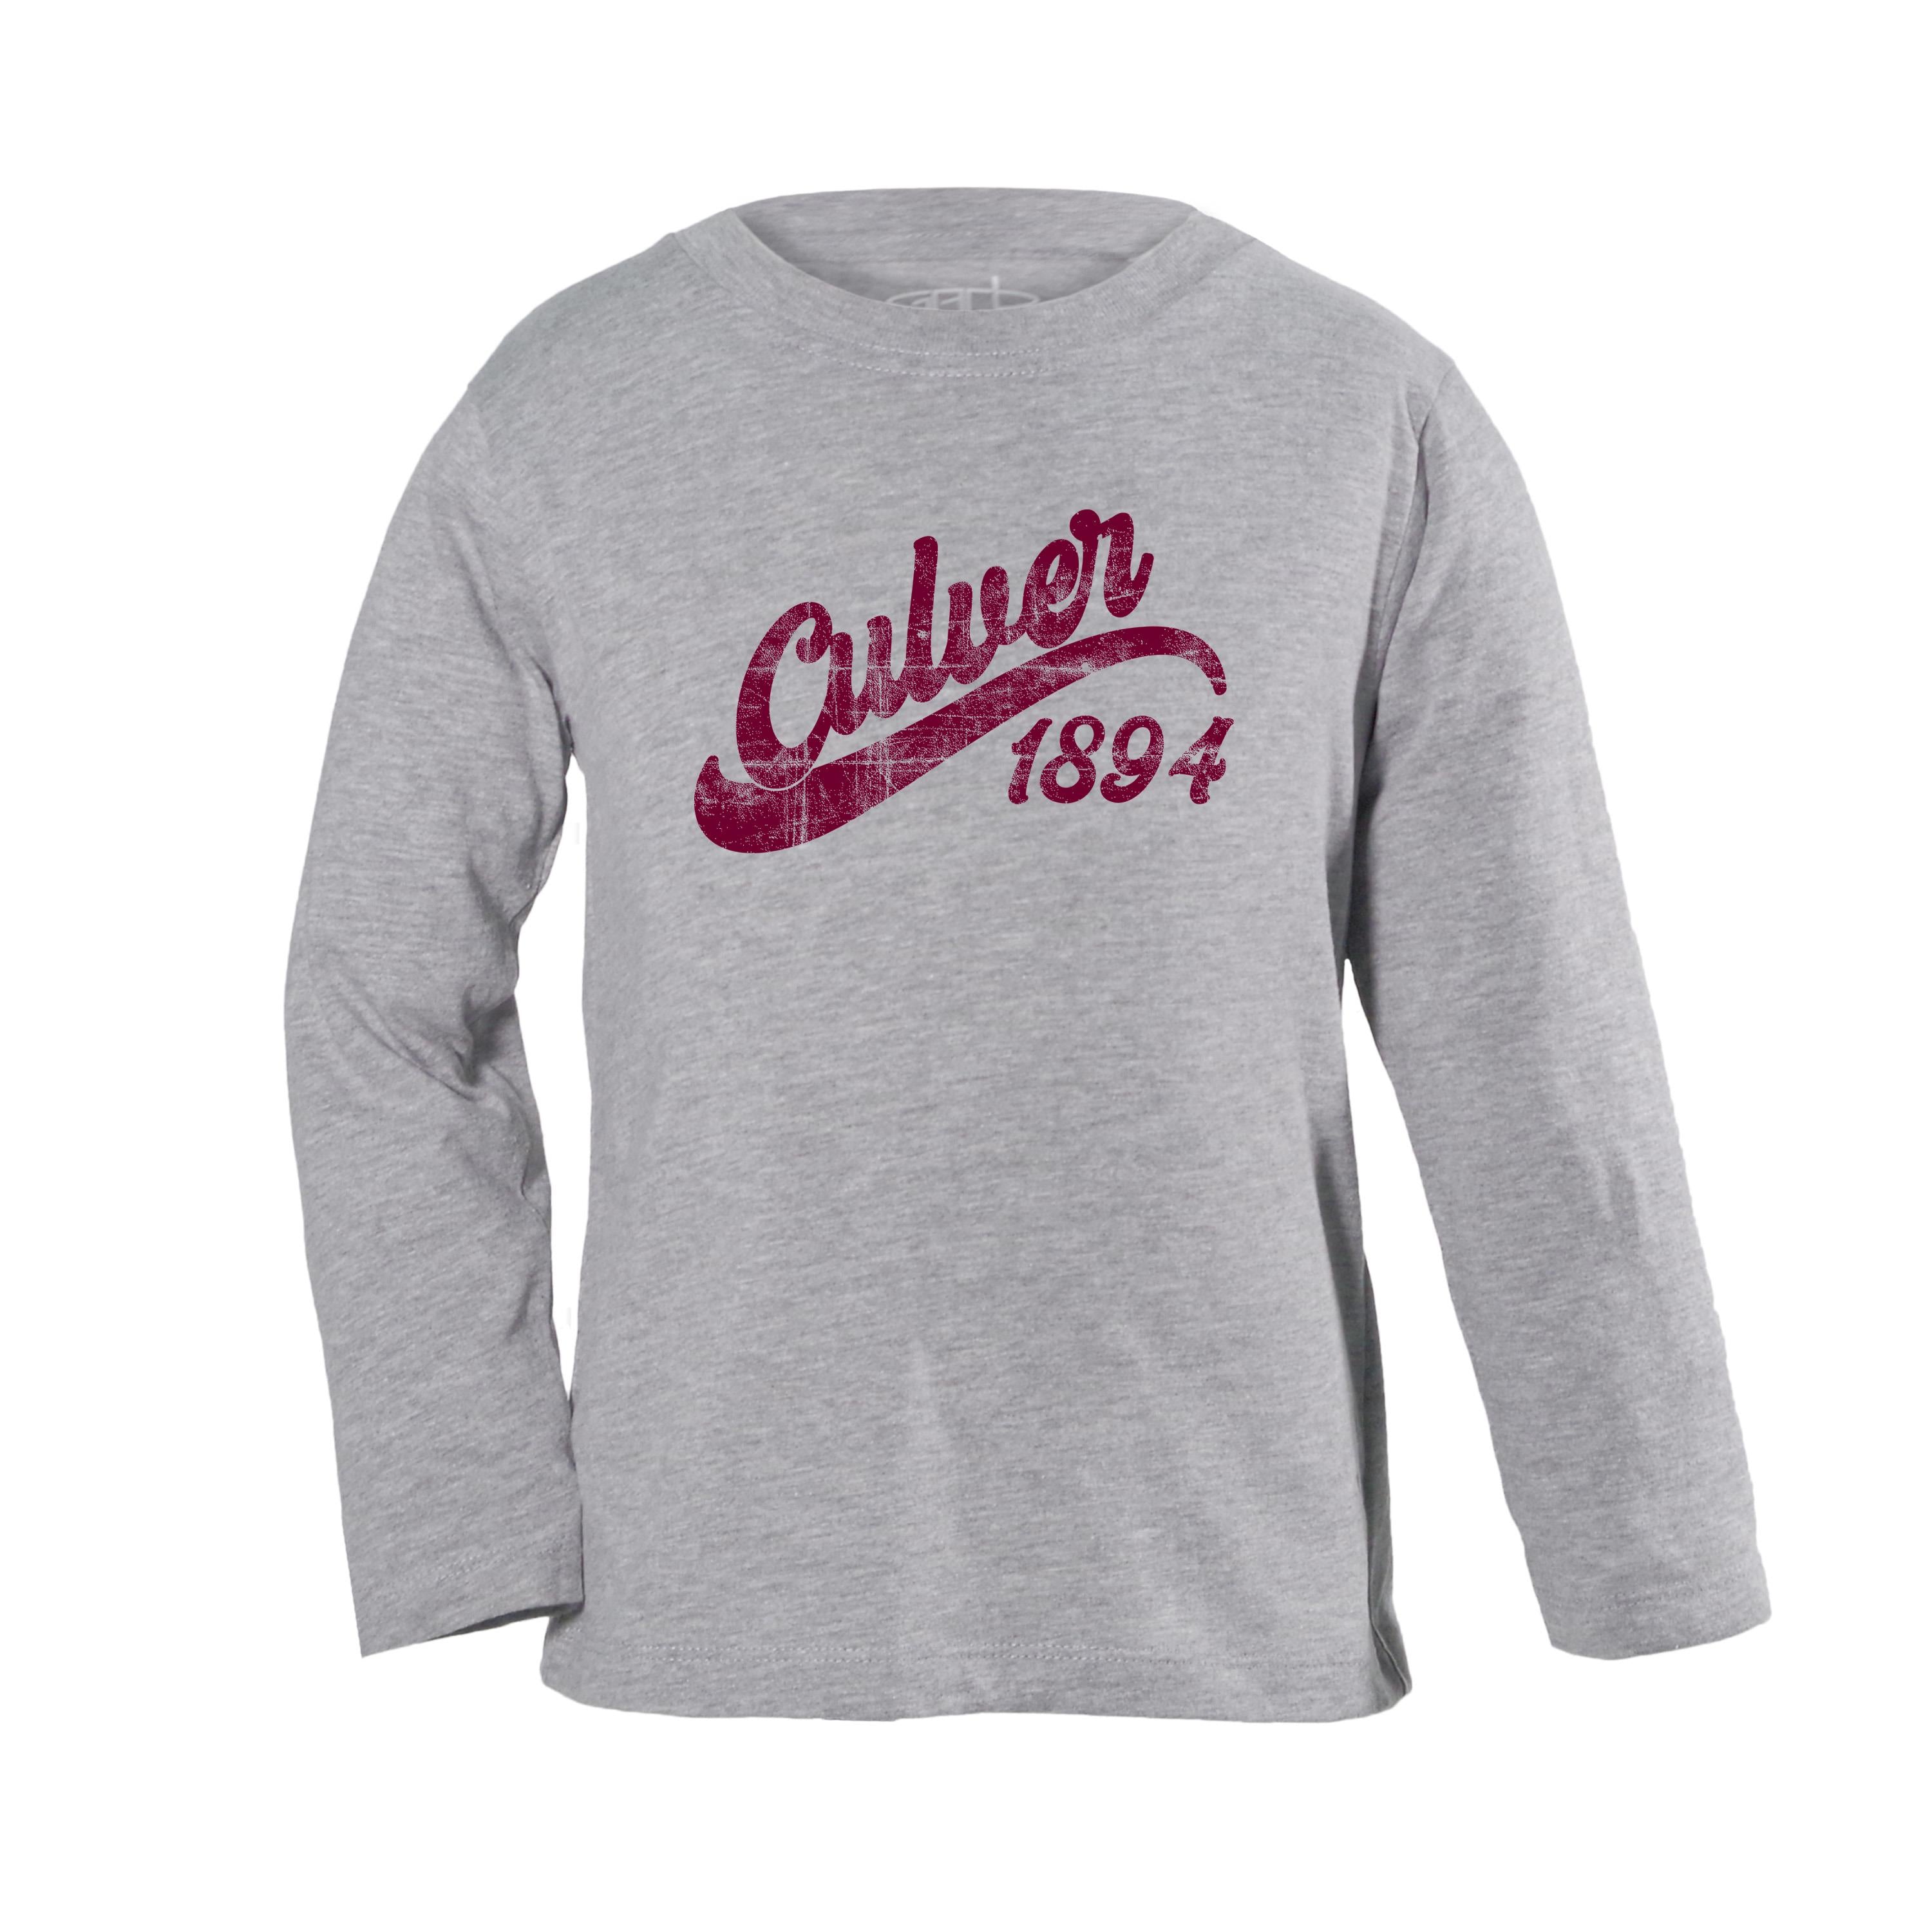 Culver 1894 Youth Lane Tee - Oxford